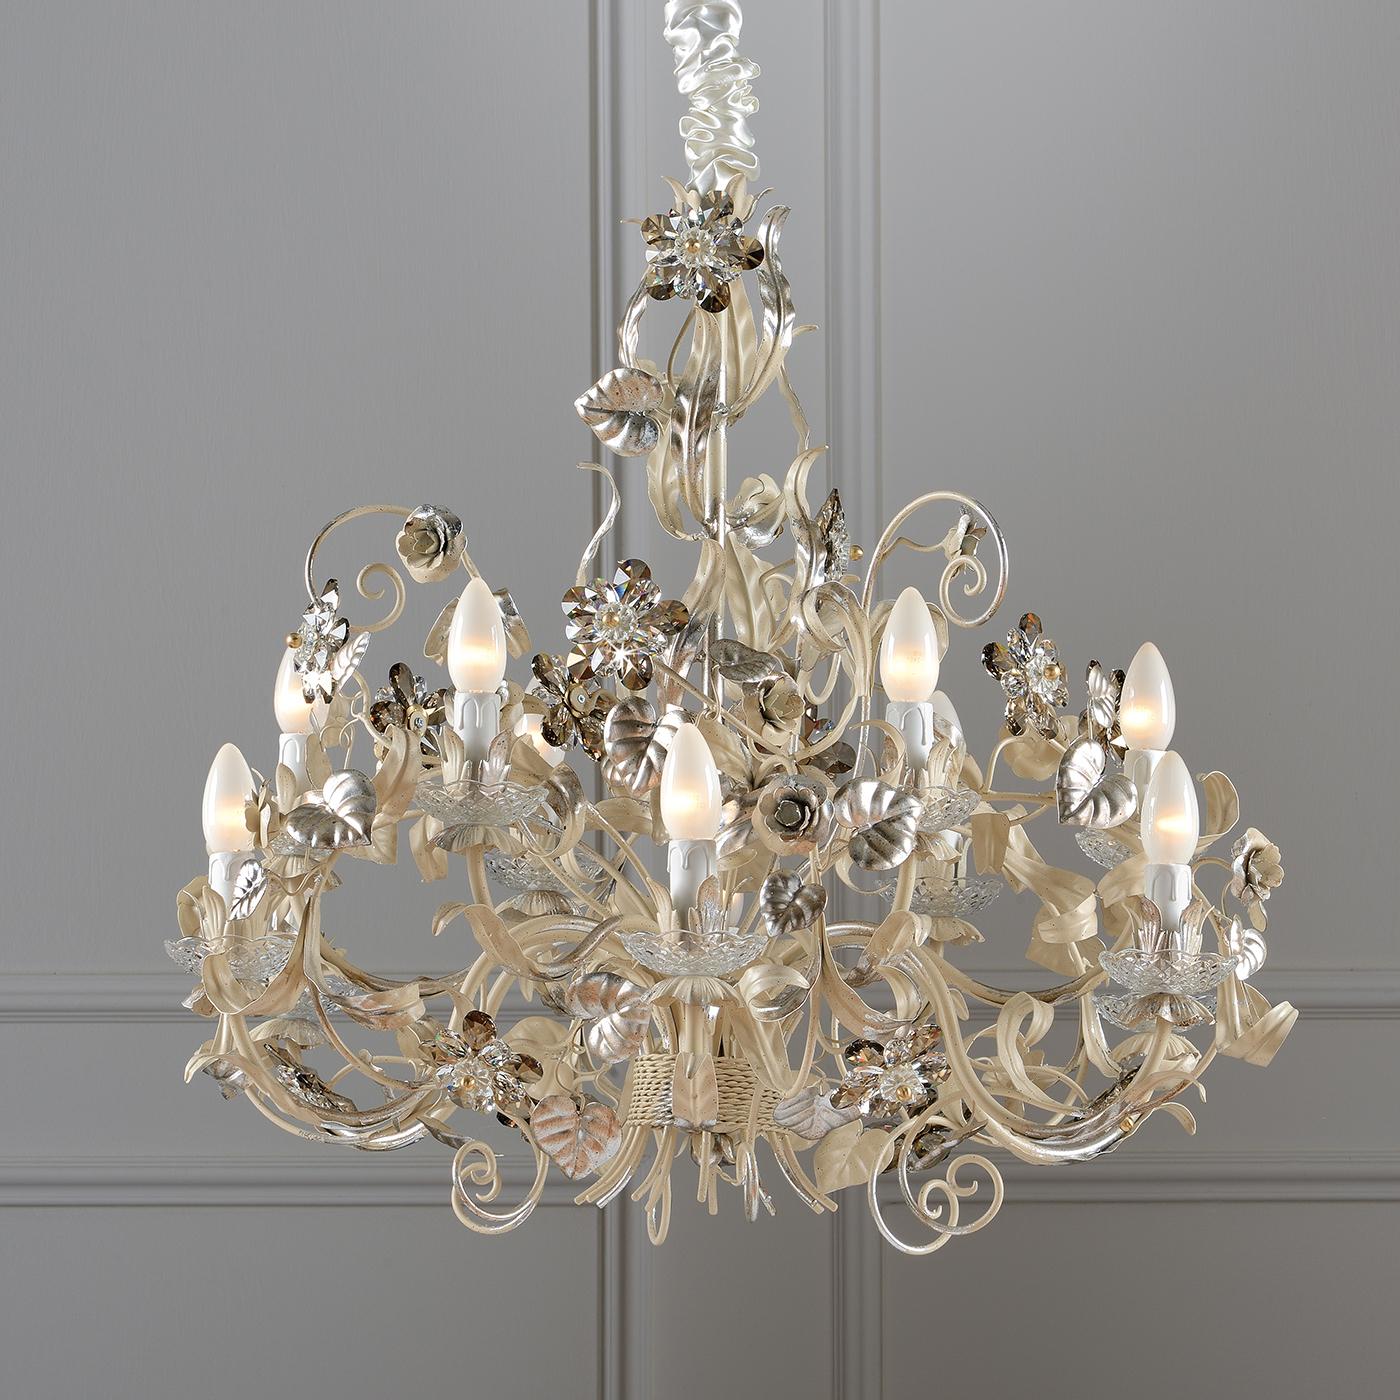 Blending traditional Italian style with natural influences, this chandelier sets the tone for sumptuous events. With a soft ivory coating accented with silver leaf, the chandelier features two tiers, each with six arms. The chandelier is completed